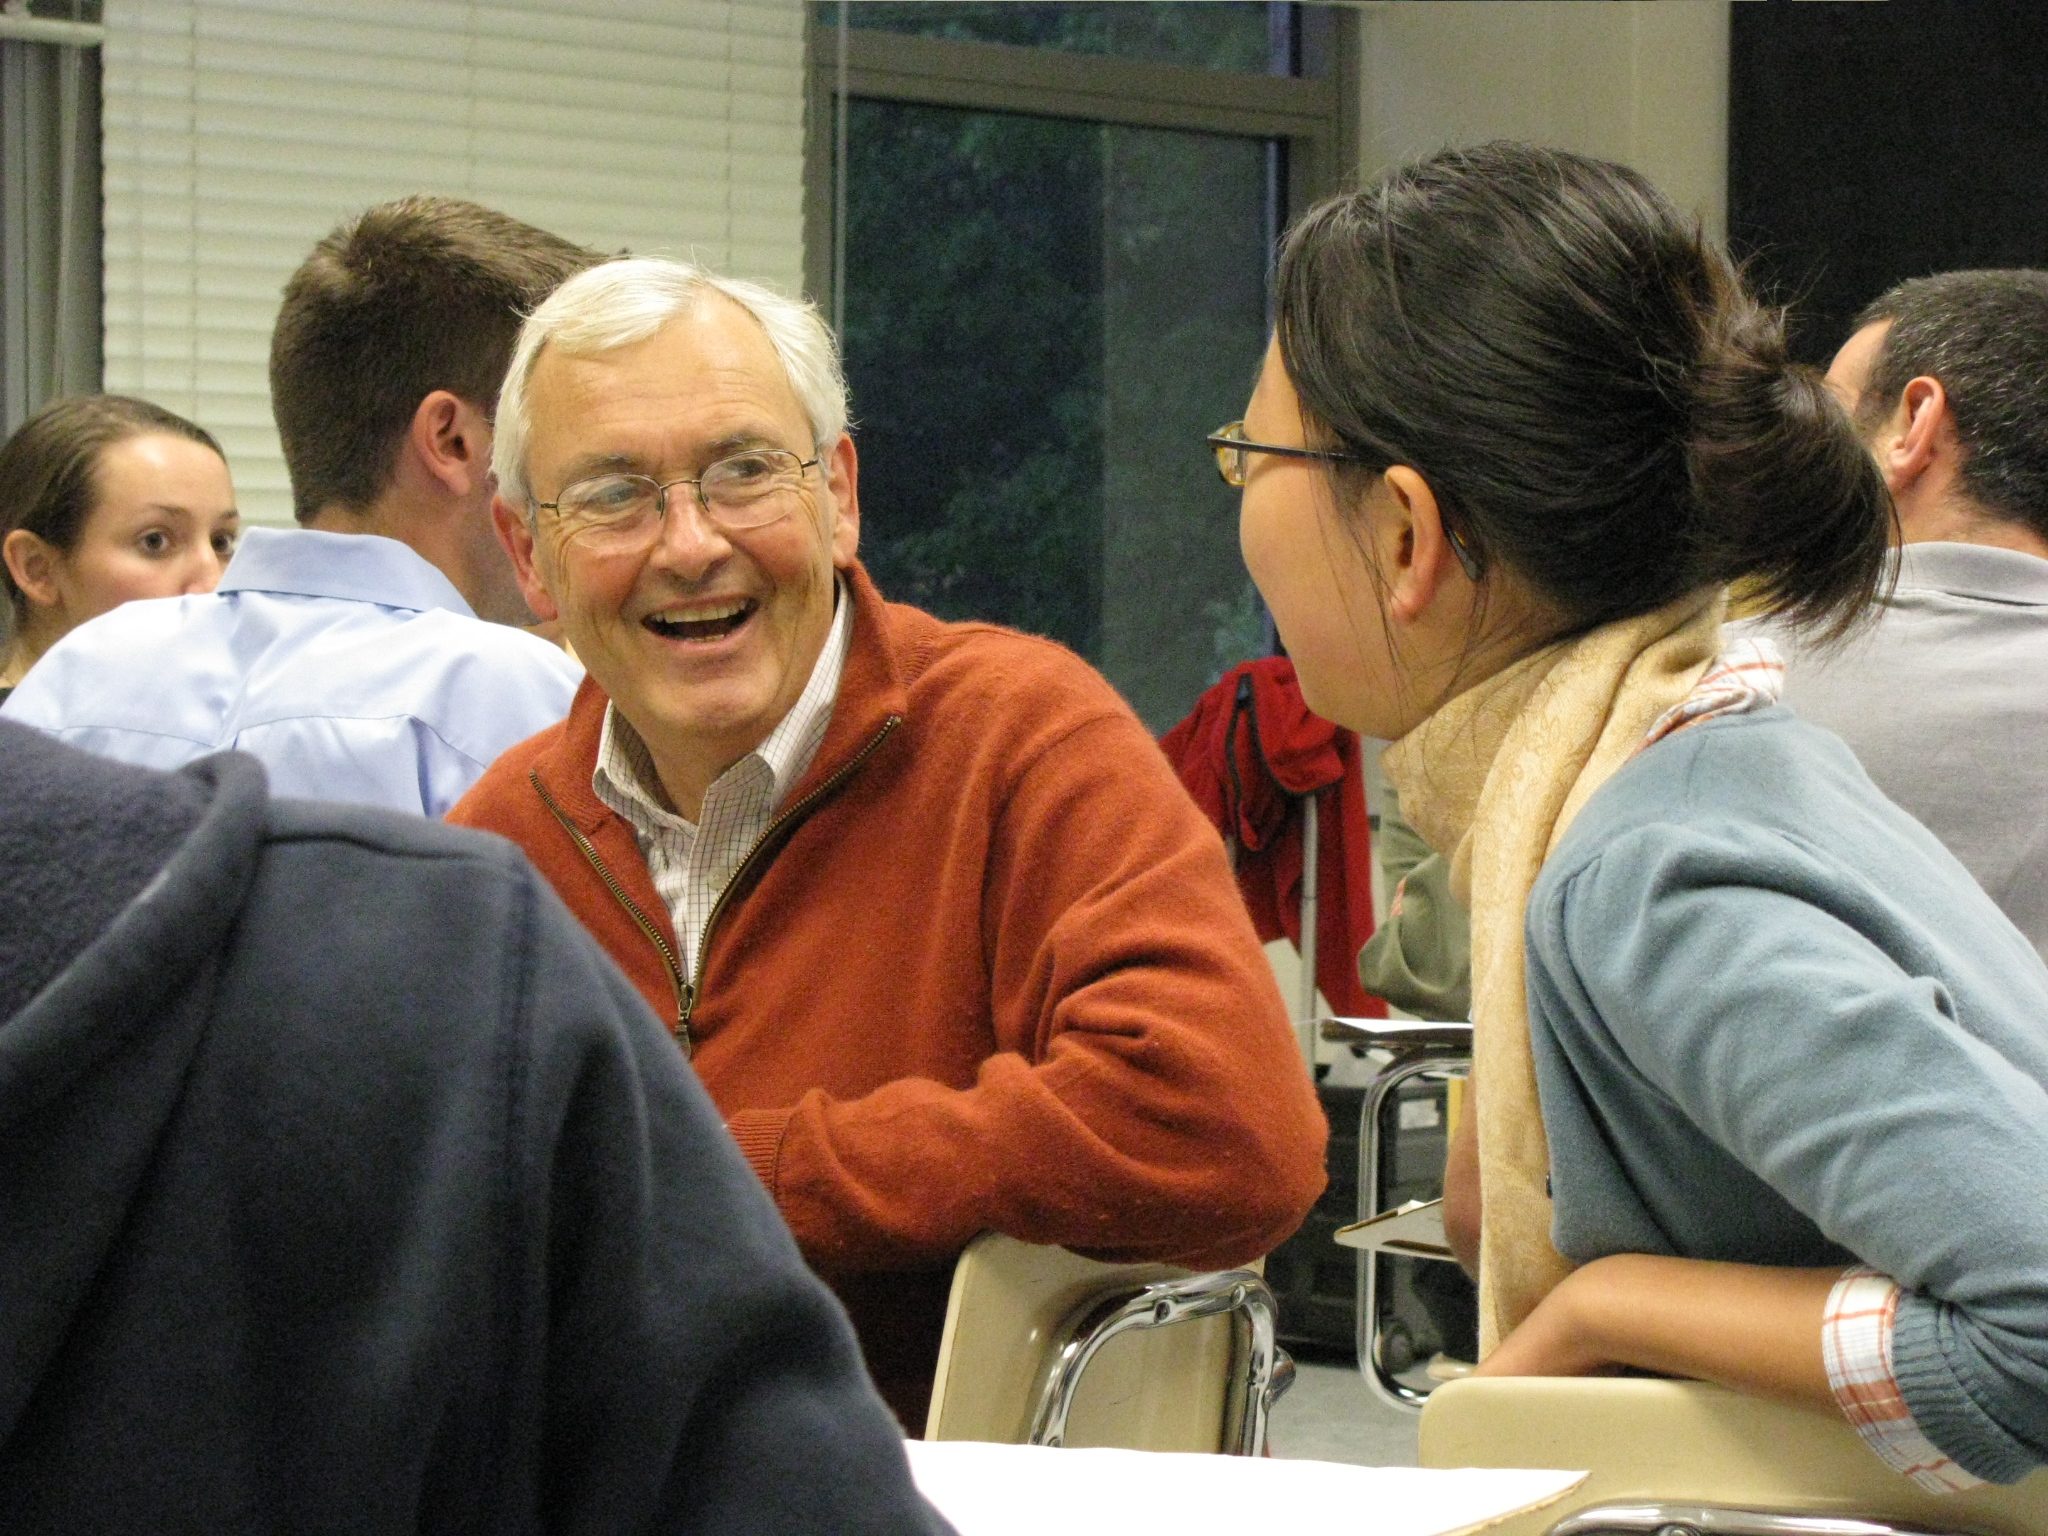 Rick Price laughing with OS student in an OS student discussion event